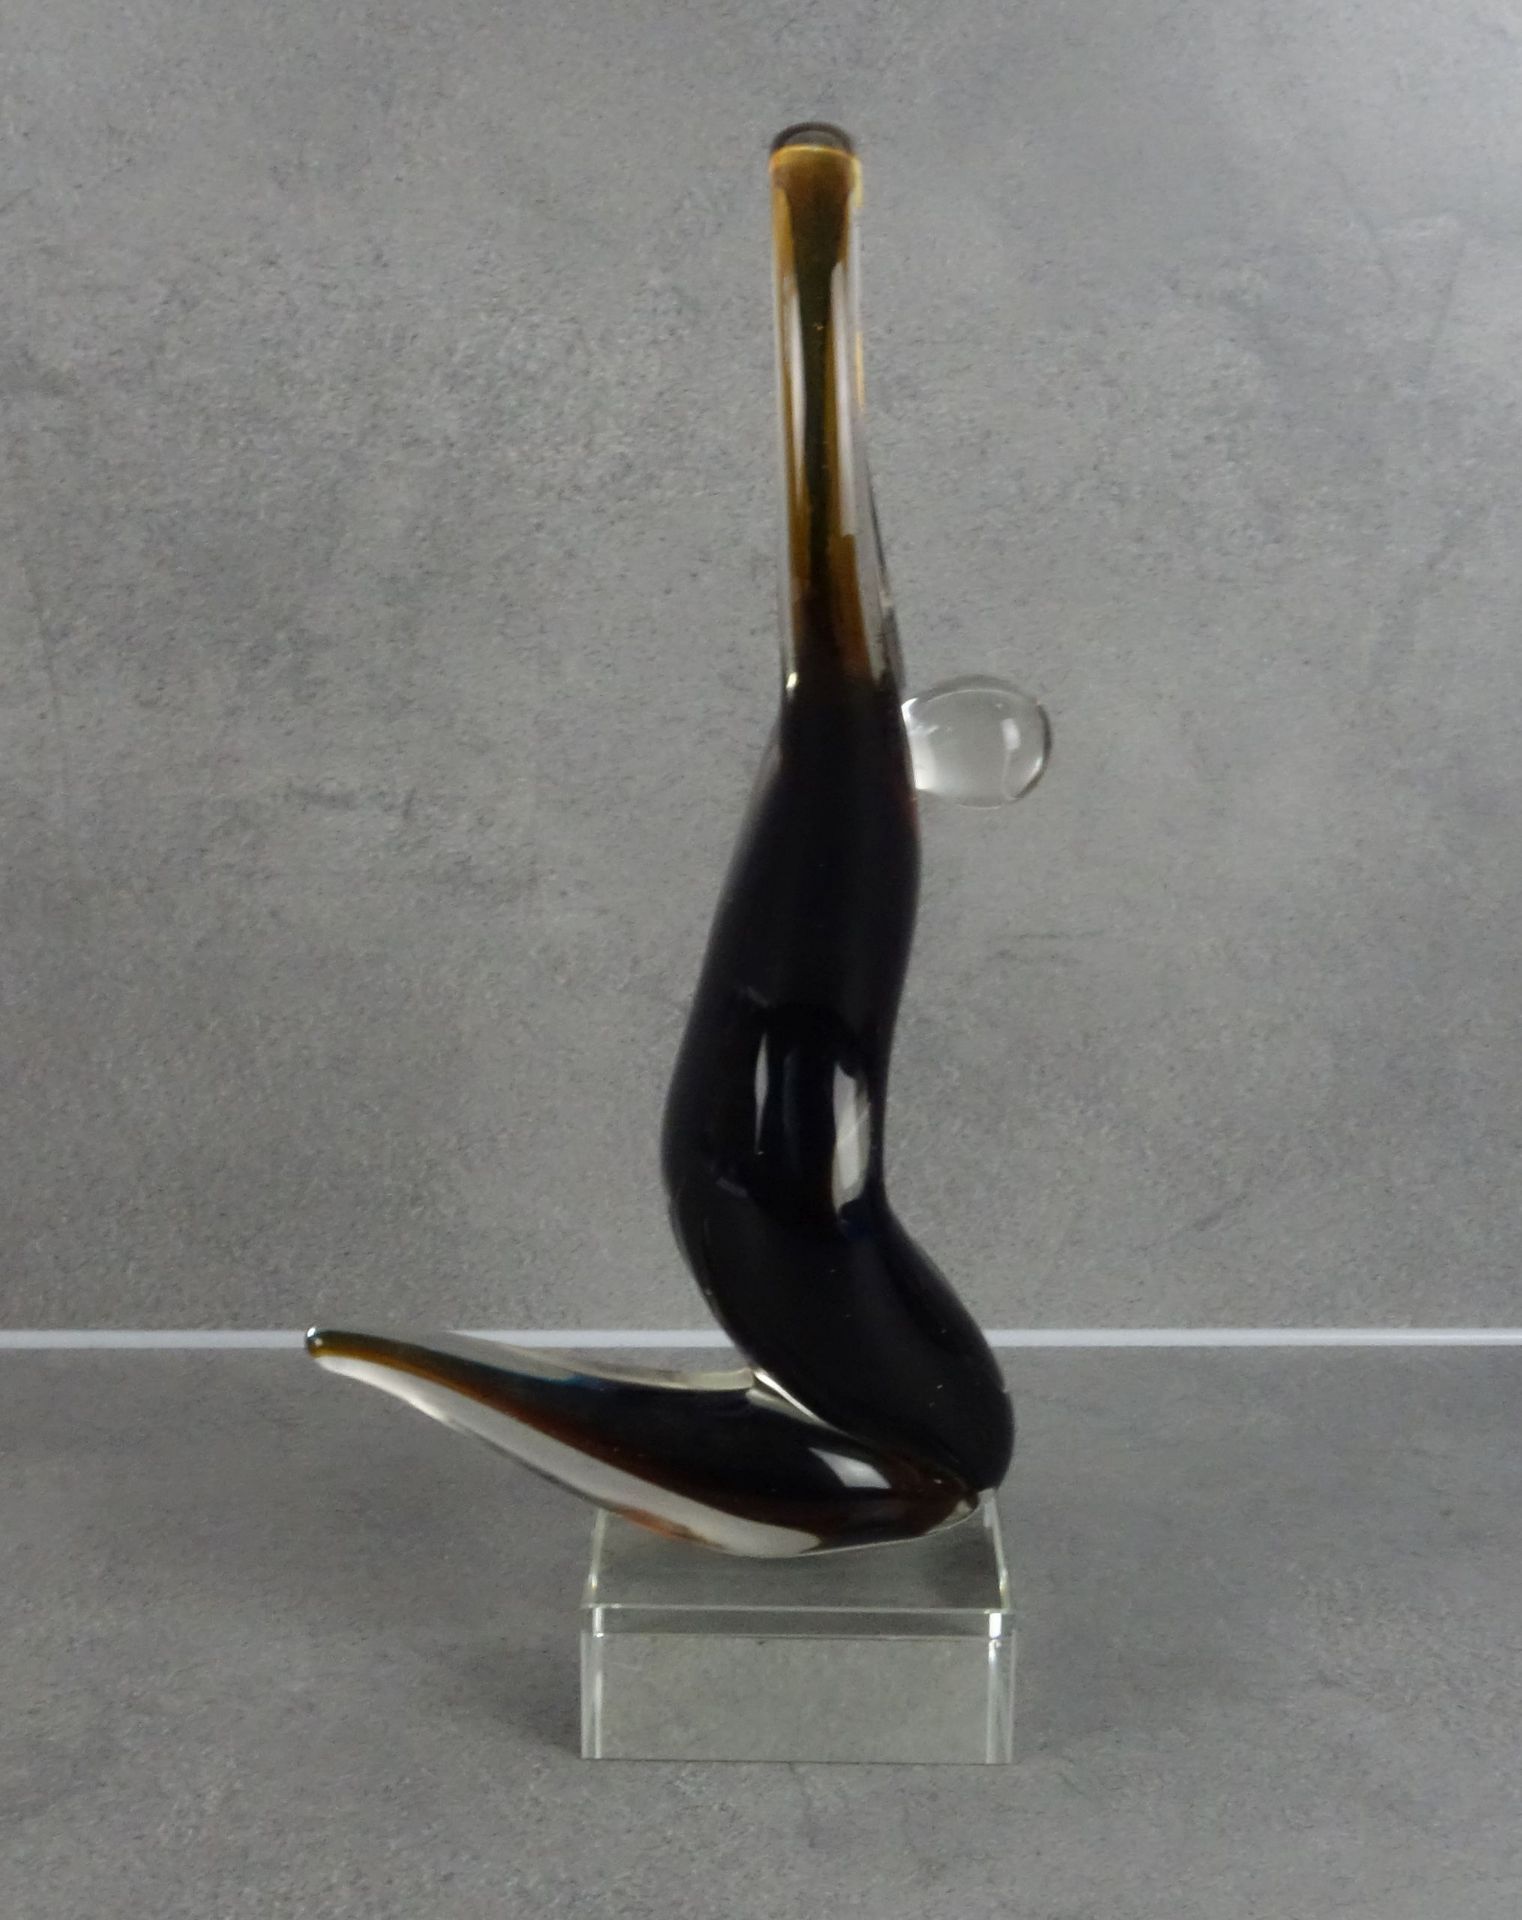 GLASS SCULPTURE "SQUATTING" - Image 4 of 4